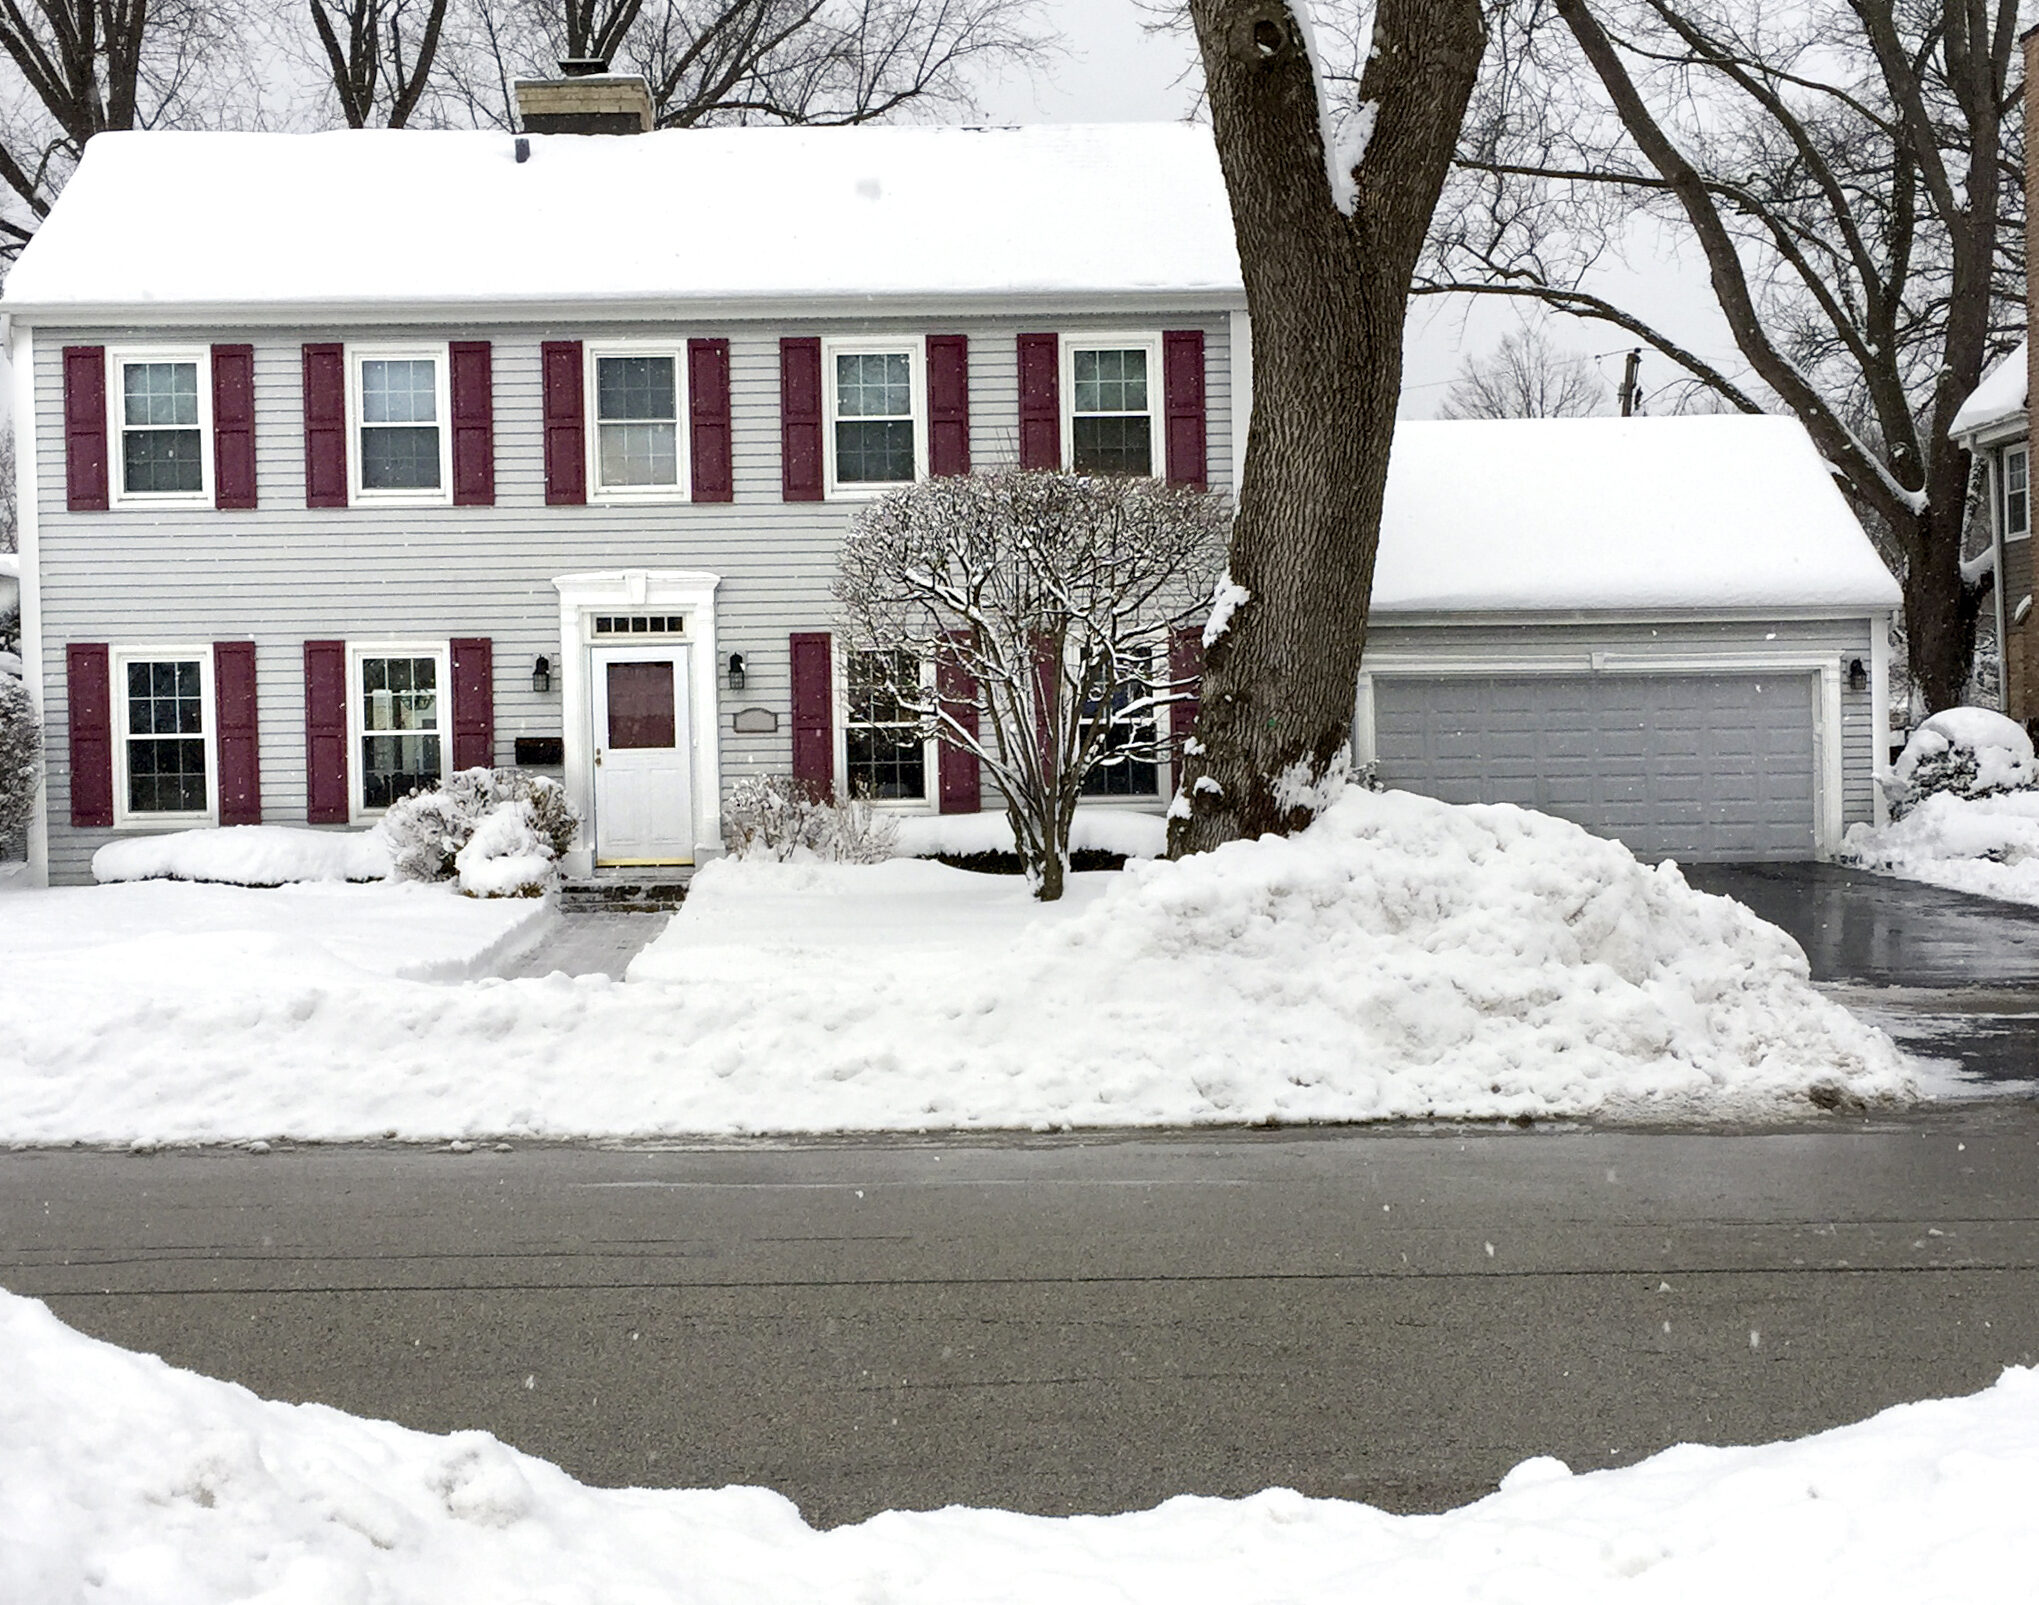 Alt text: A photo of a two-story home with an attached garage. There is a lot of snow on the yard, but the driveway and pathway are clear.